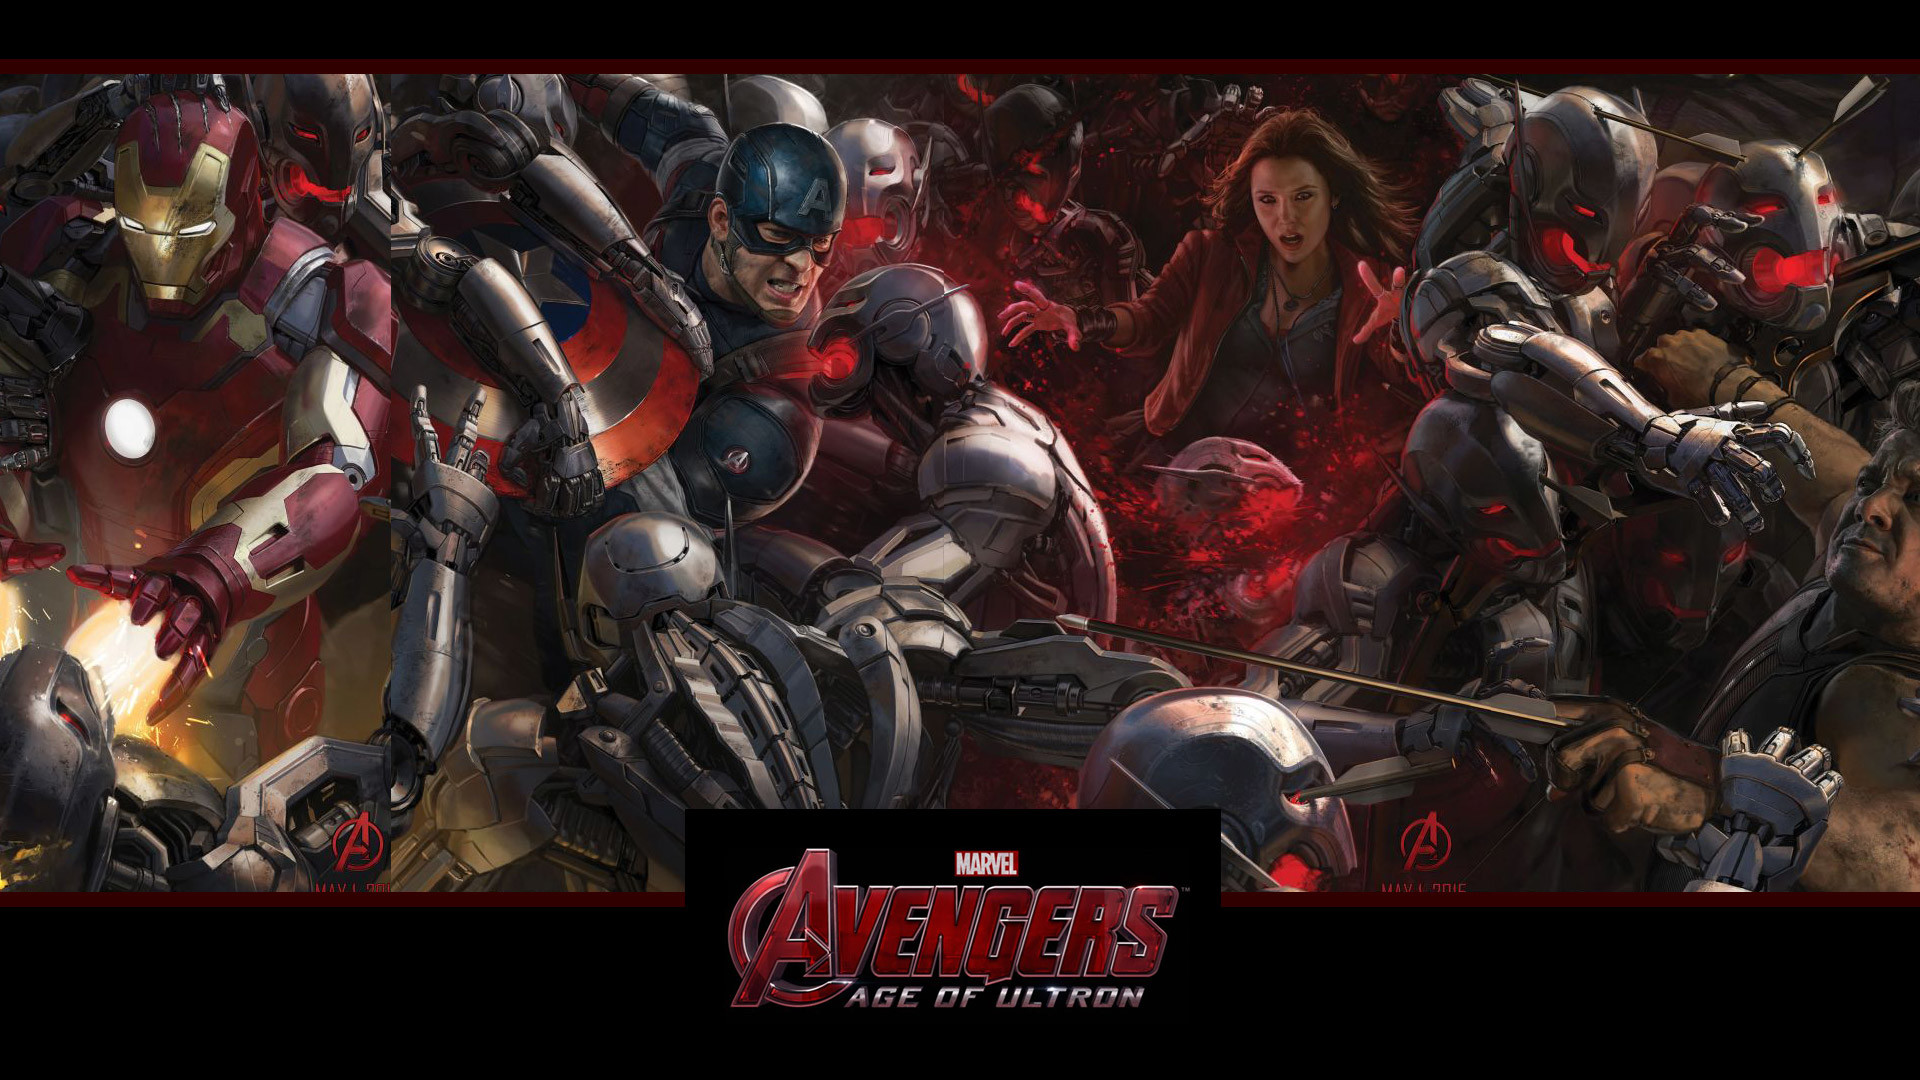 1920x1080 ... Avengers 2 Age of Ultron 2015 Desktop amp iPhone Wallpapers HD